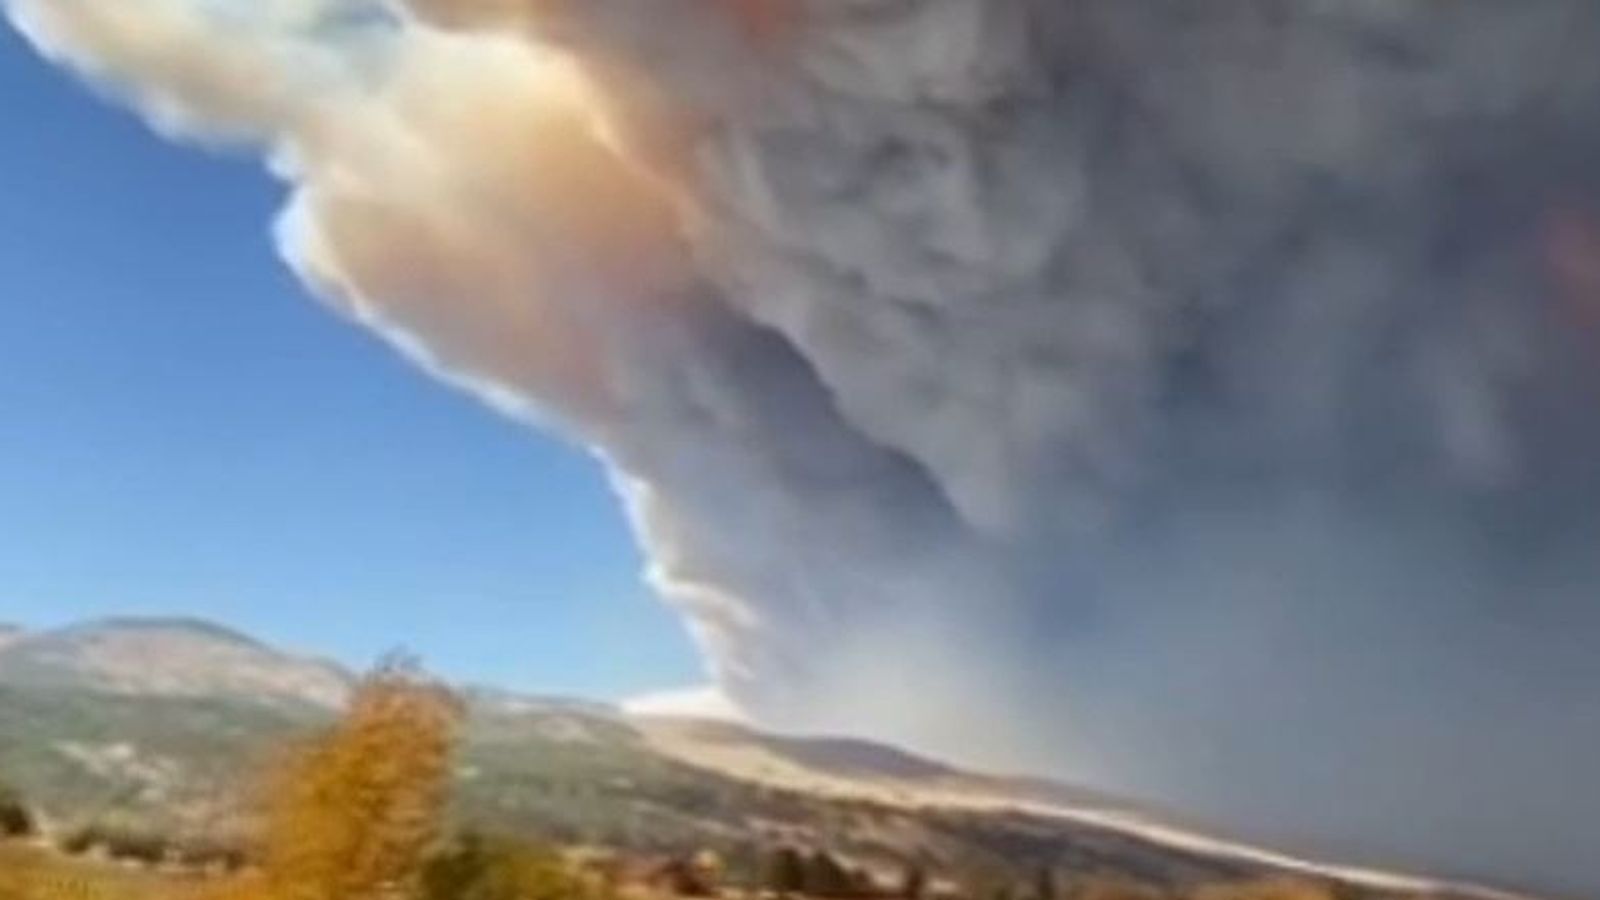 Colorado wildfire largest in state's history as smoke fills the